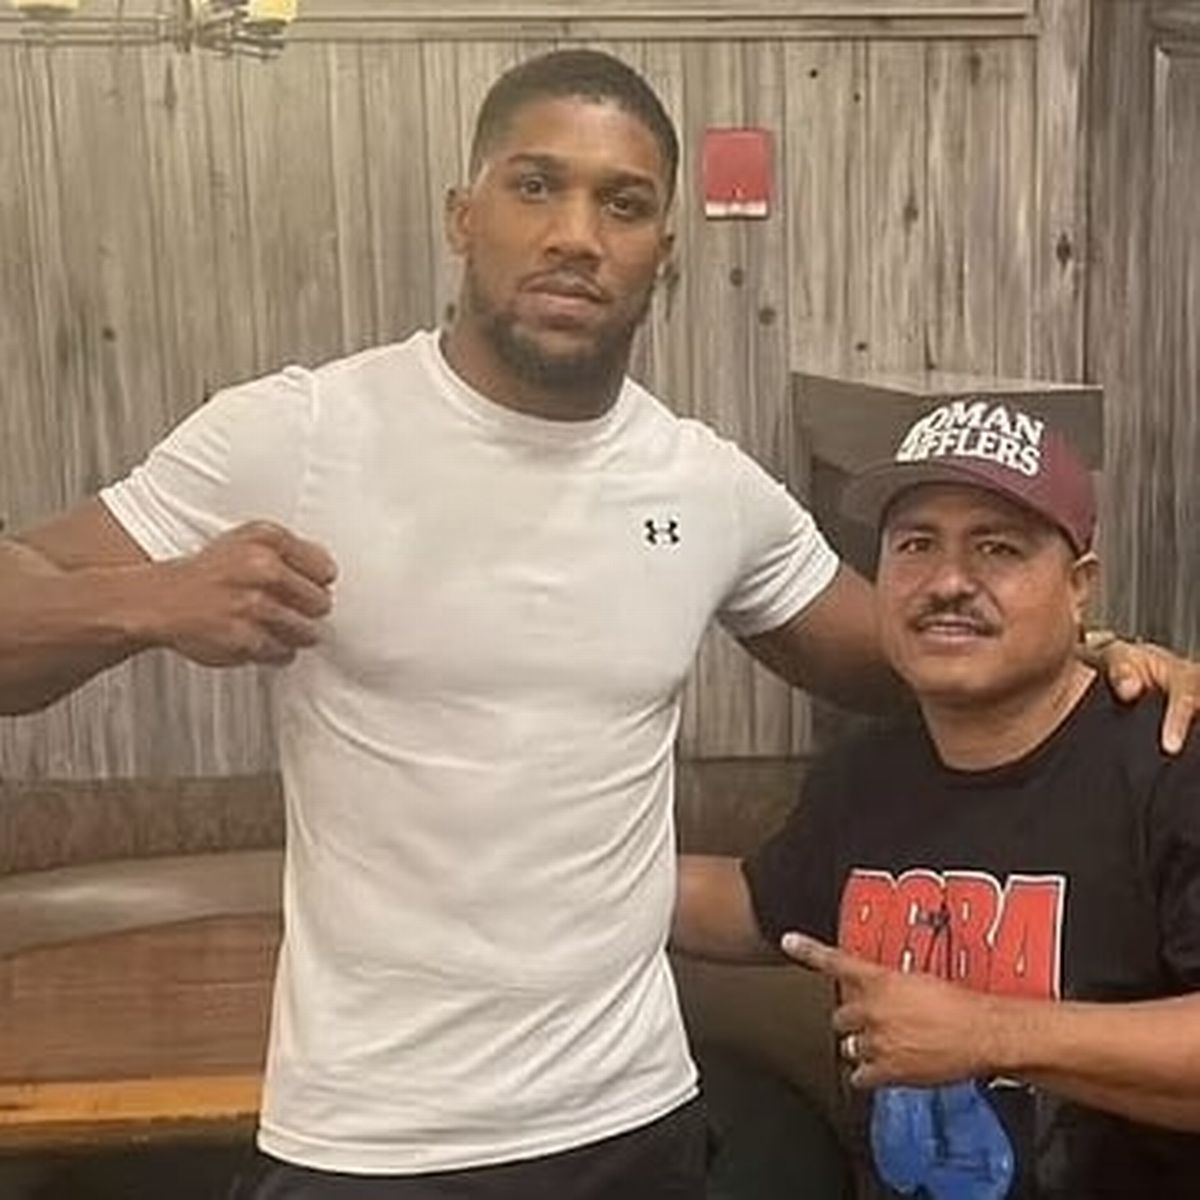 Anthony Joshua was told by Robert Garcia, his new trainer, to change his attitude before he teamed up with Robert Garcia for the Oleksandr Usyk fight